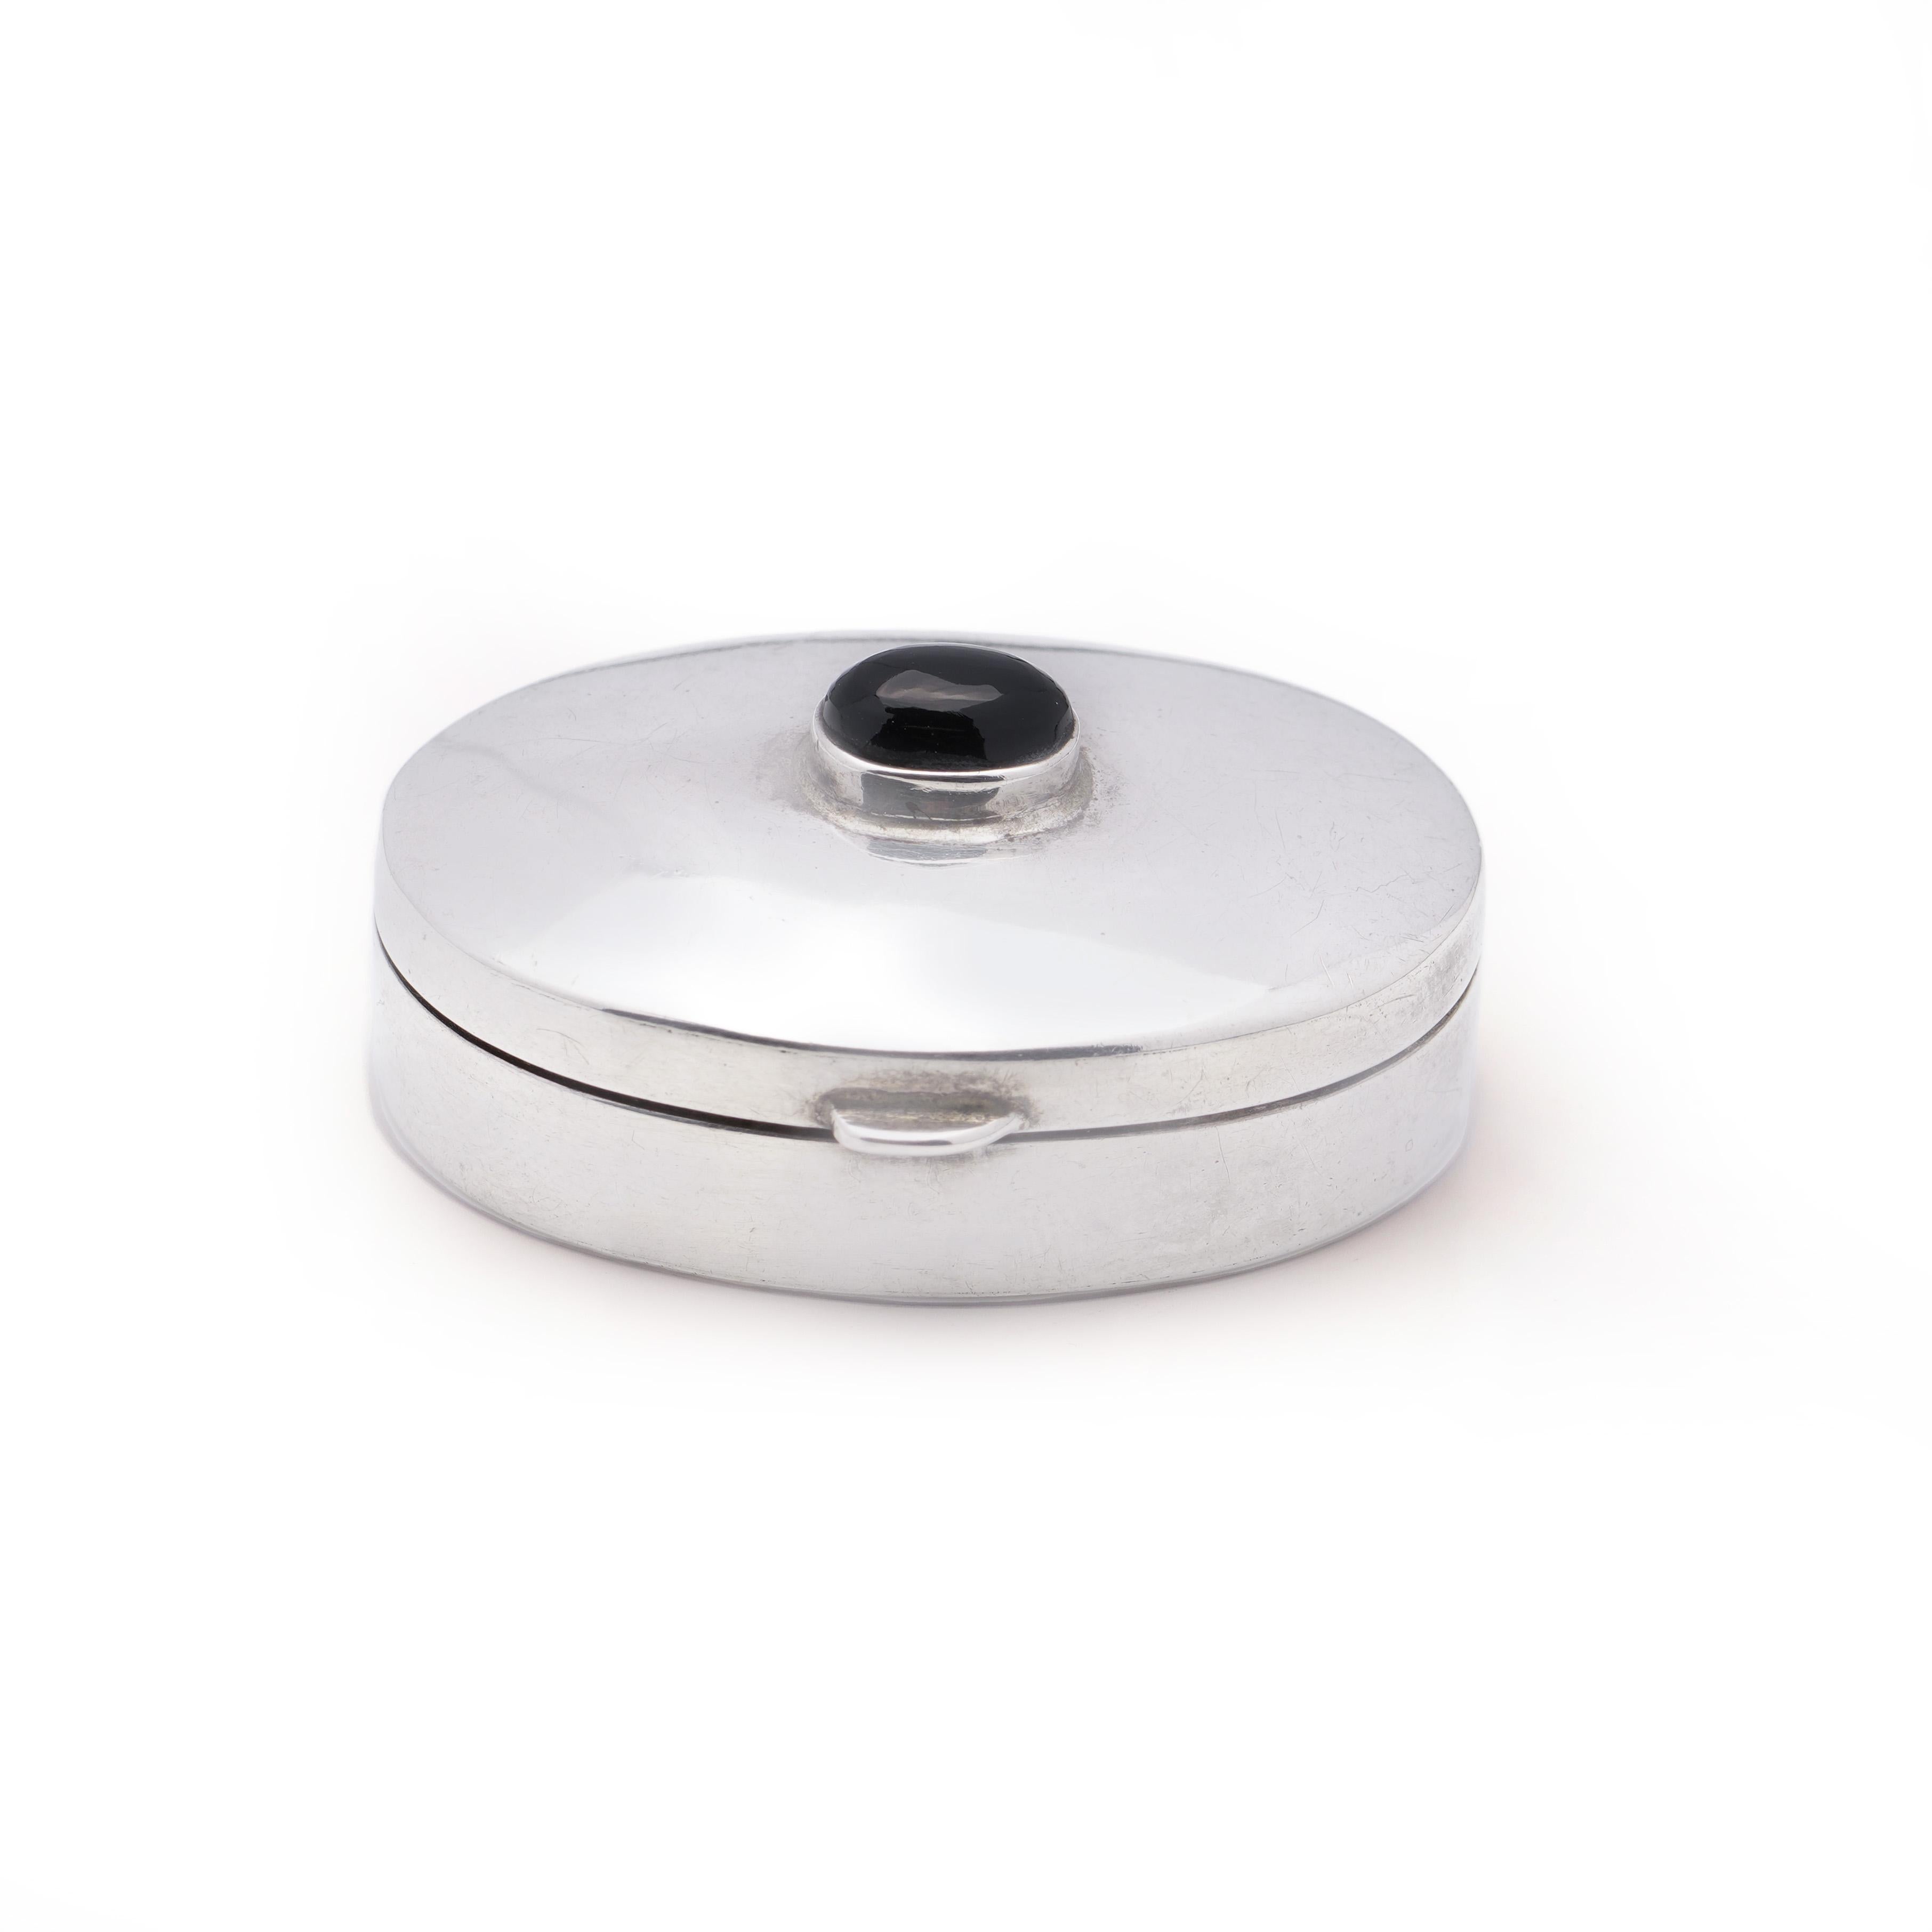 British Late 20th-Century Oval-Shaped 925 silver Pillbox by Ari D Norman  For Sale